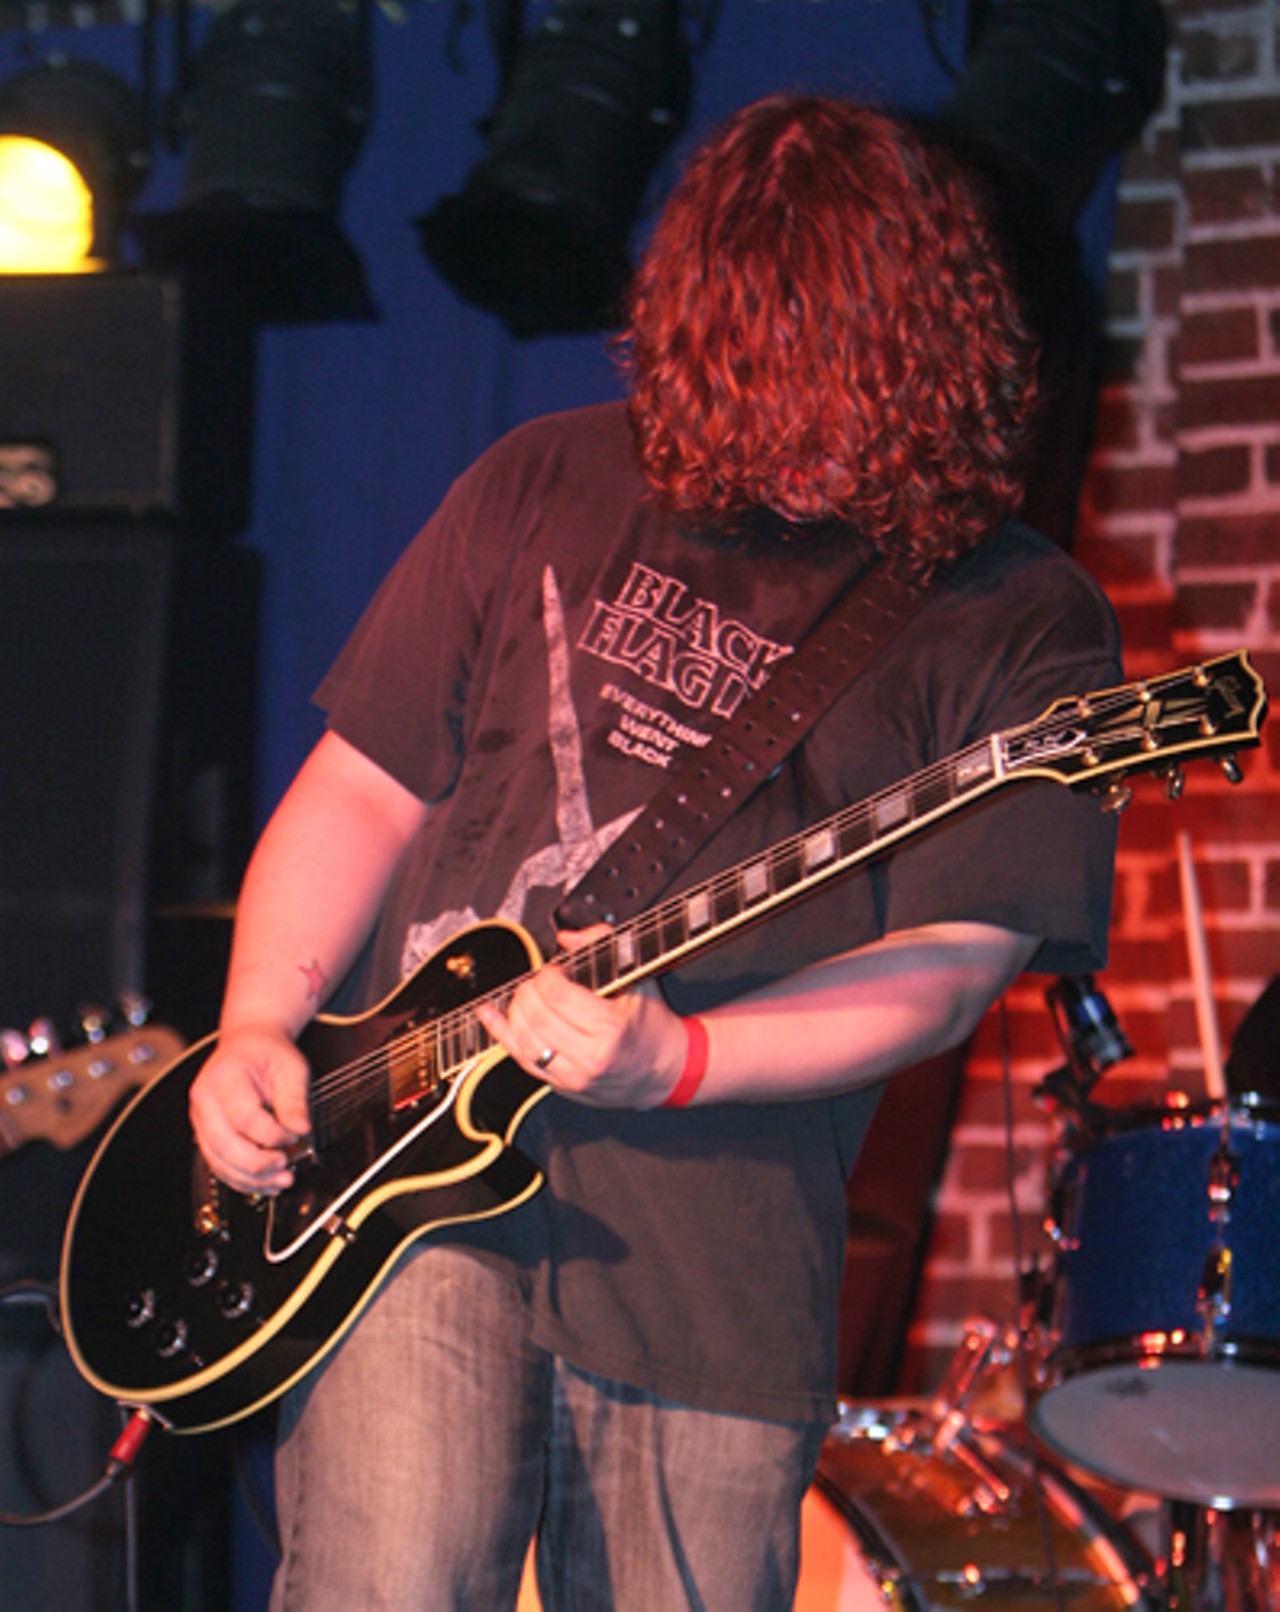 Jon Lumley, of Shame Club, plays his guitar at the Duck Room in Blueberry Hill.